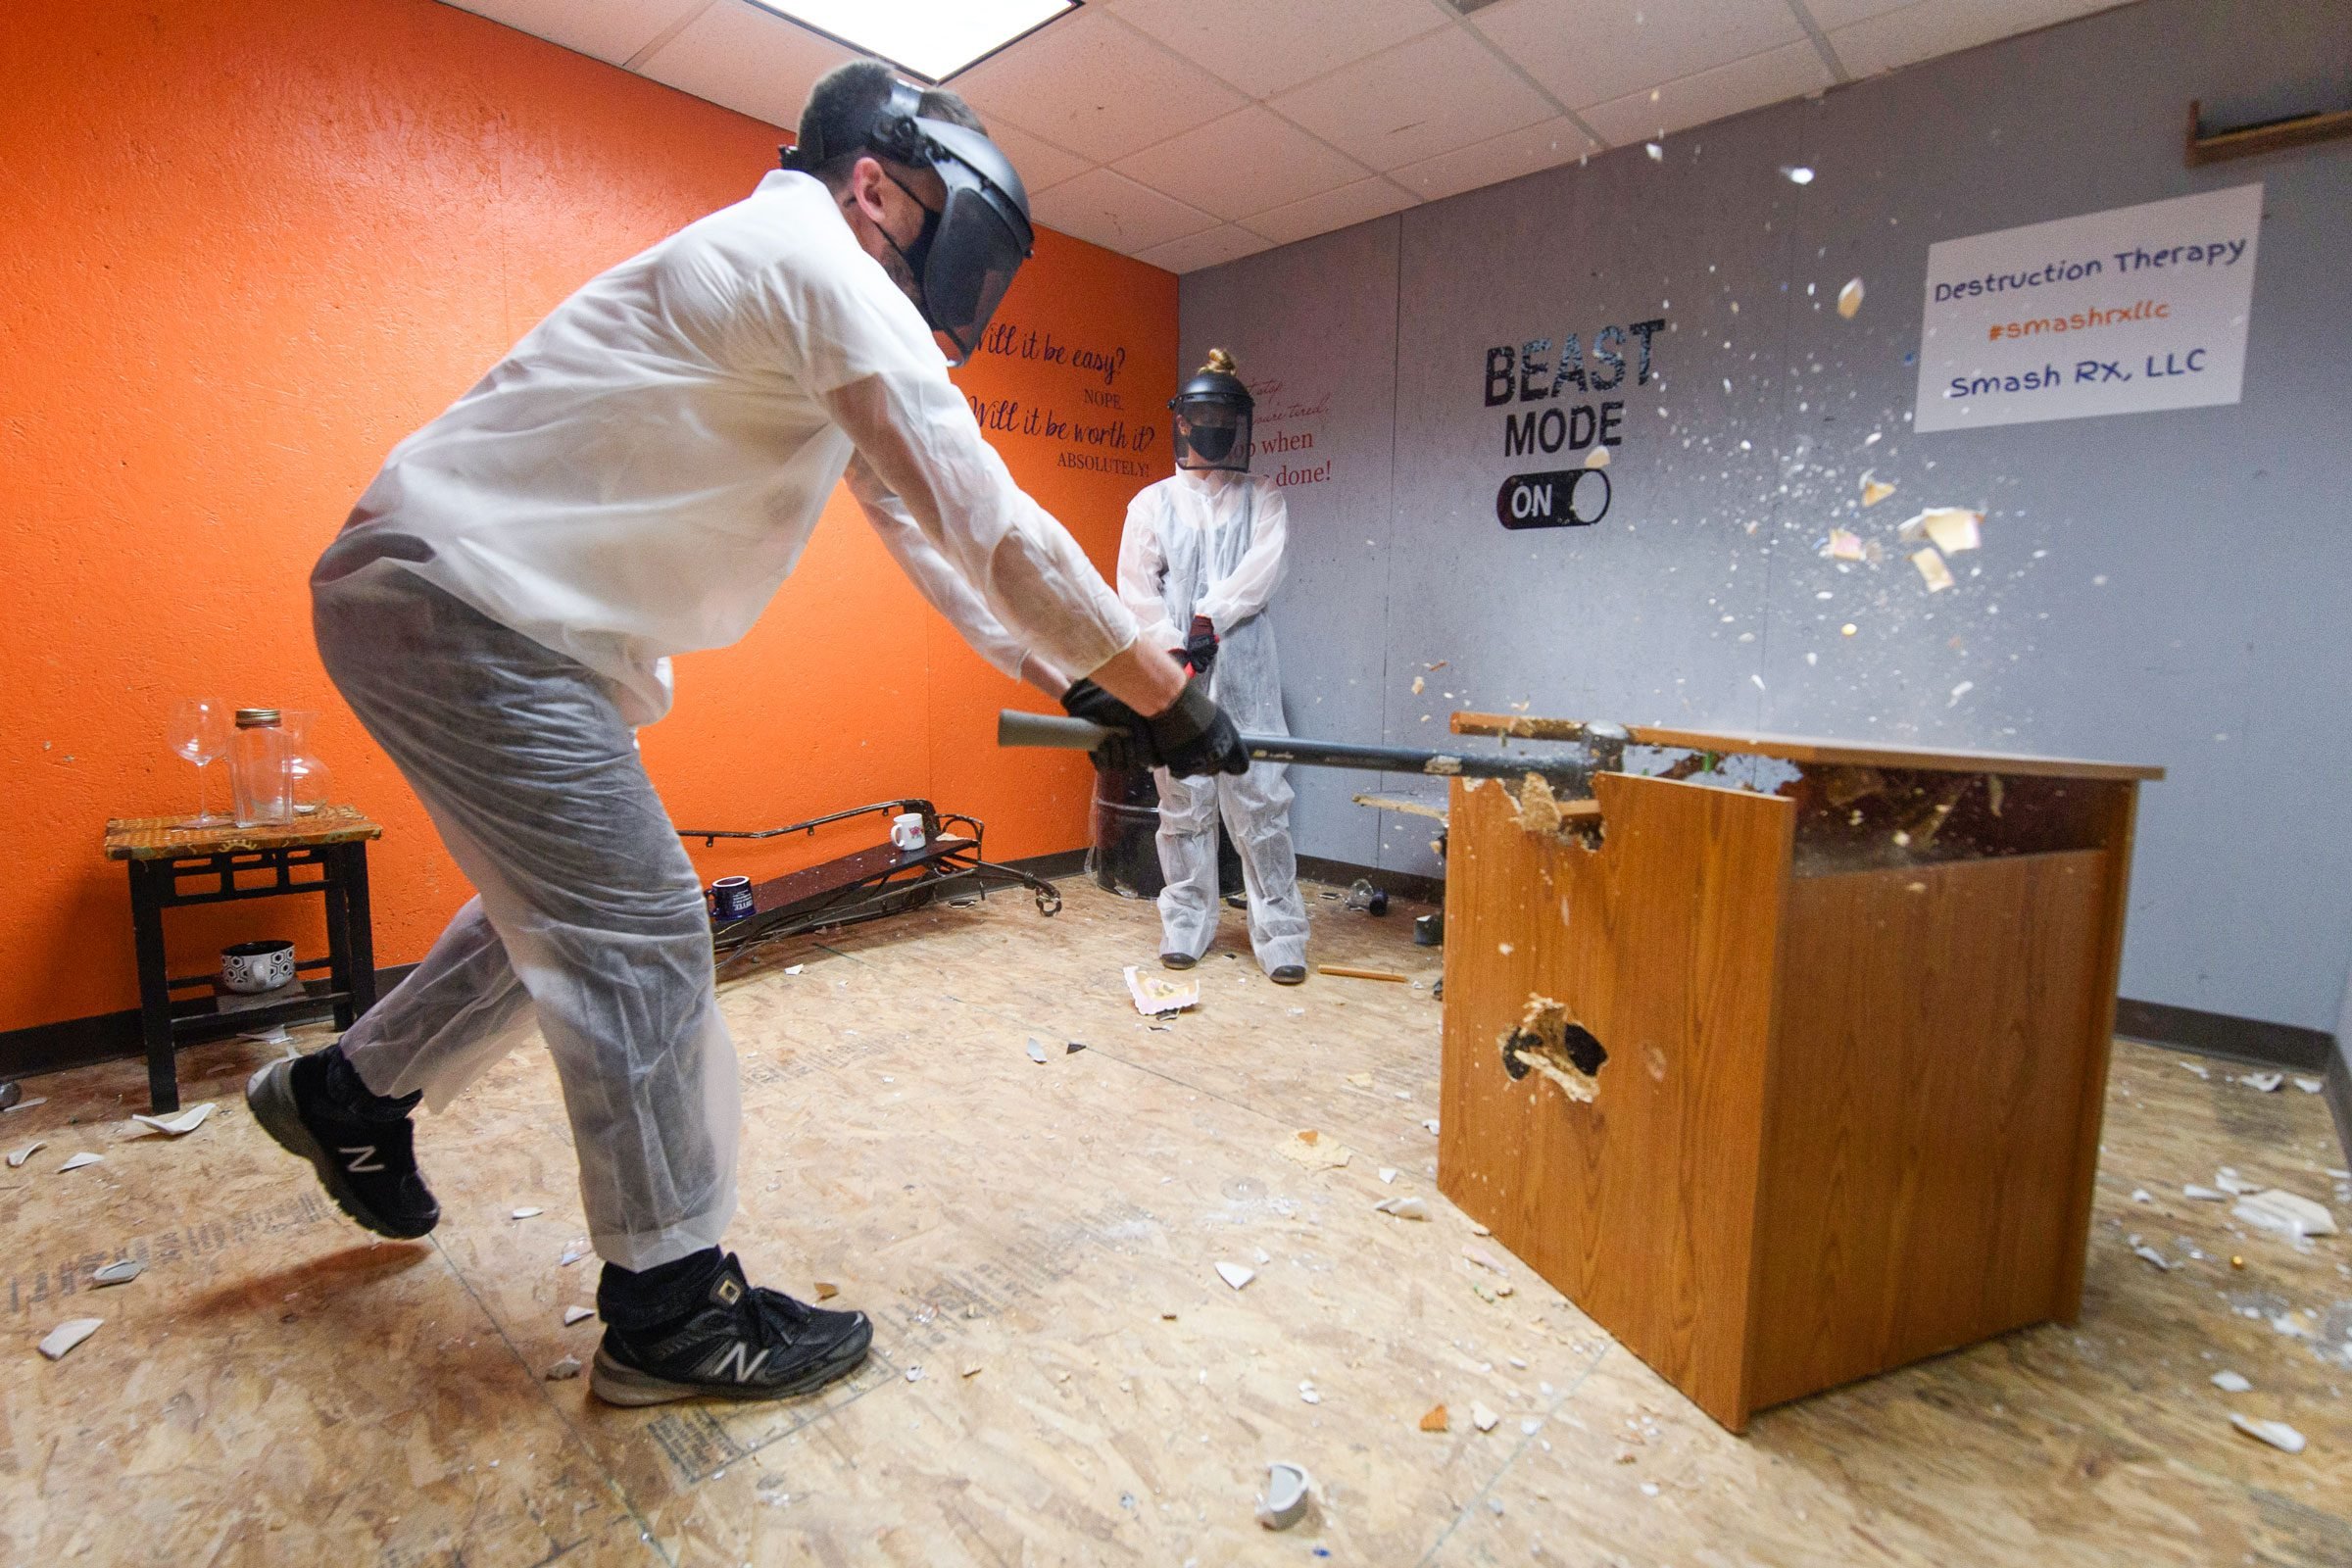 Looking for a "Rage Room"? A Therapist Suggests You Should Know This One Thing